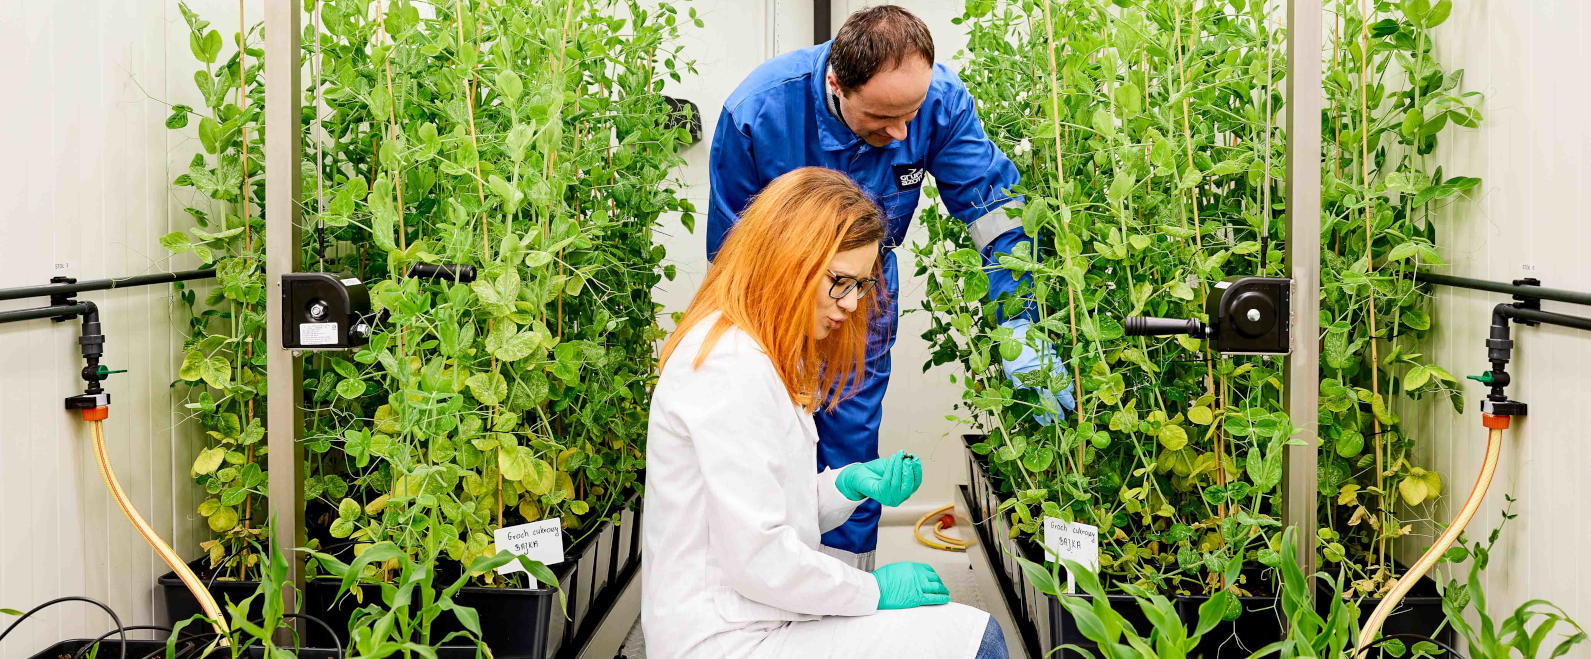 Grupa Azoty S.A. opens new phytotron at its Research and Development Centre in Tarnów